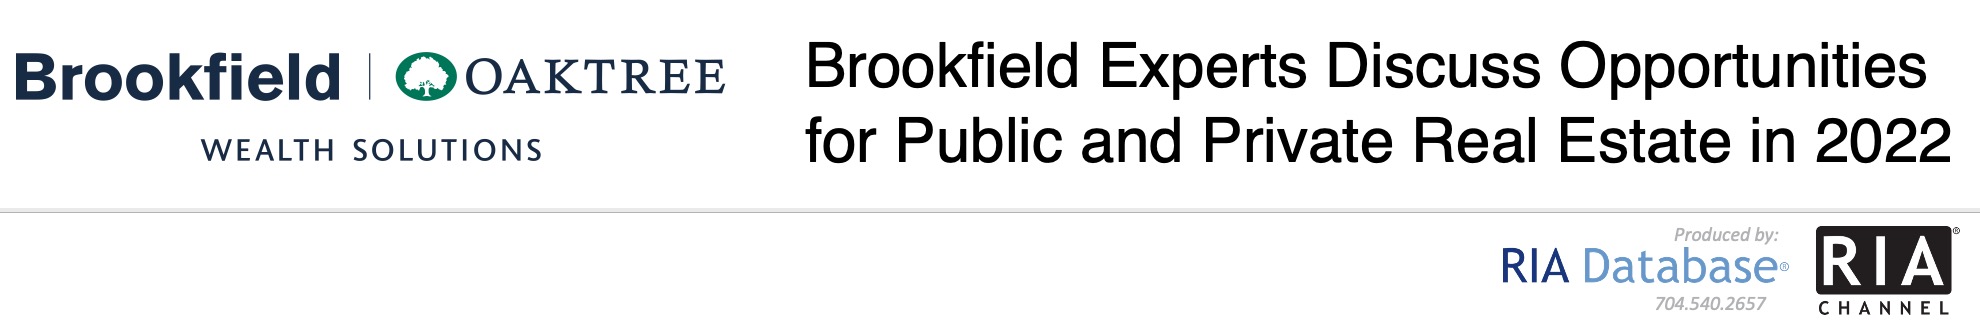 Brookfield Experts Discuss Opportunities for Public and Private Real Estate in 2022